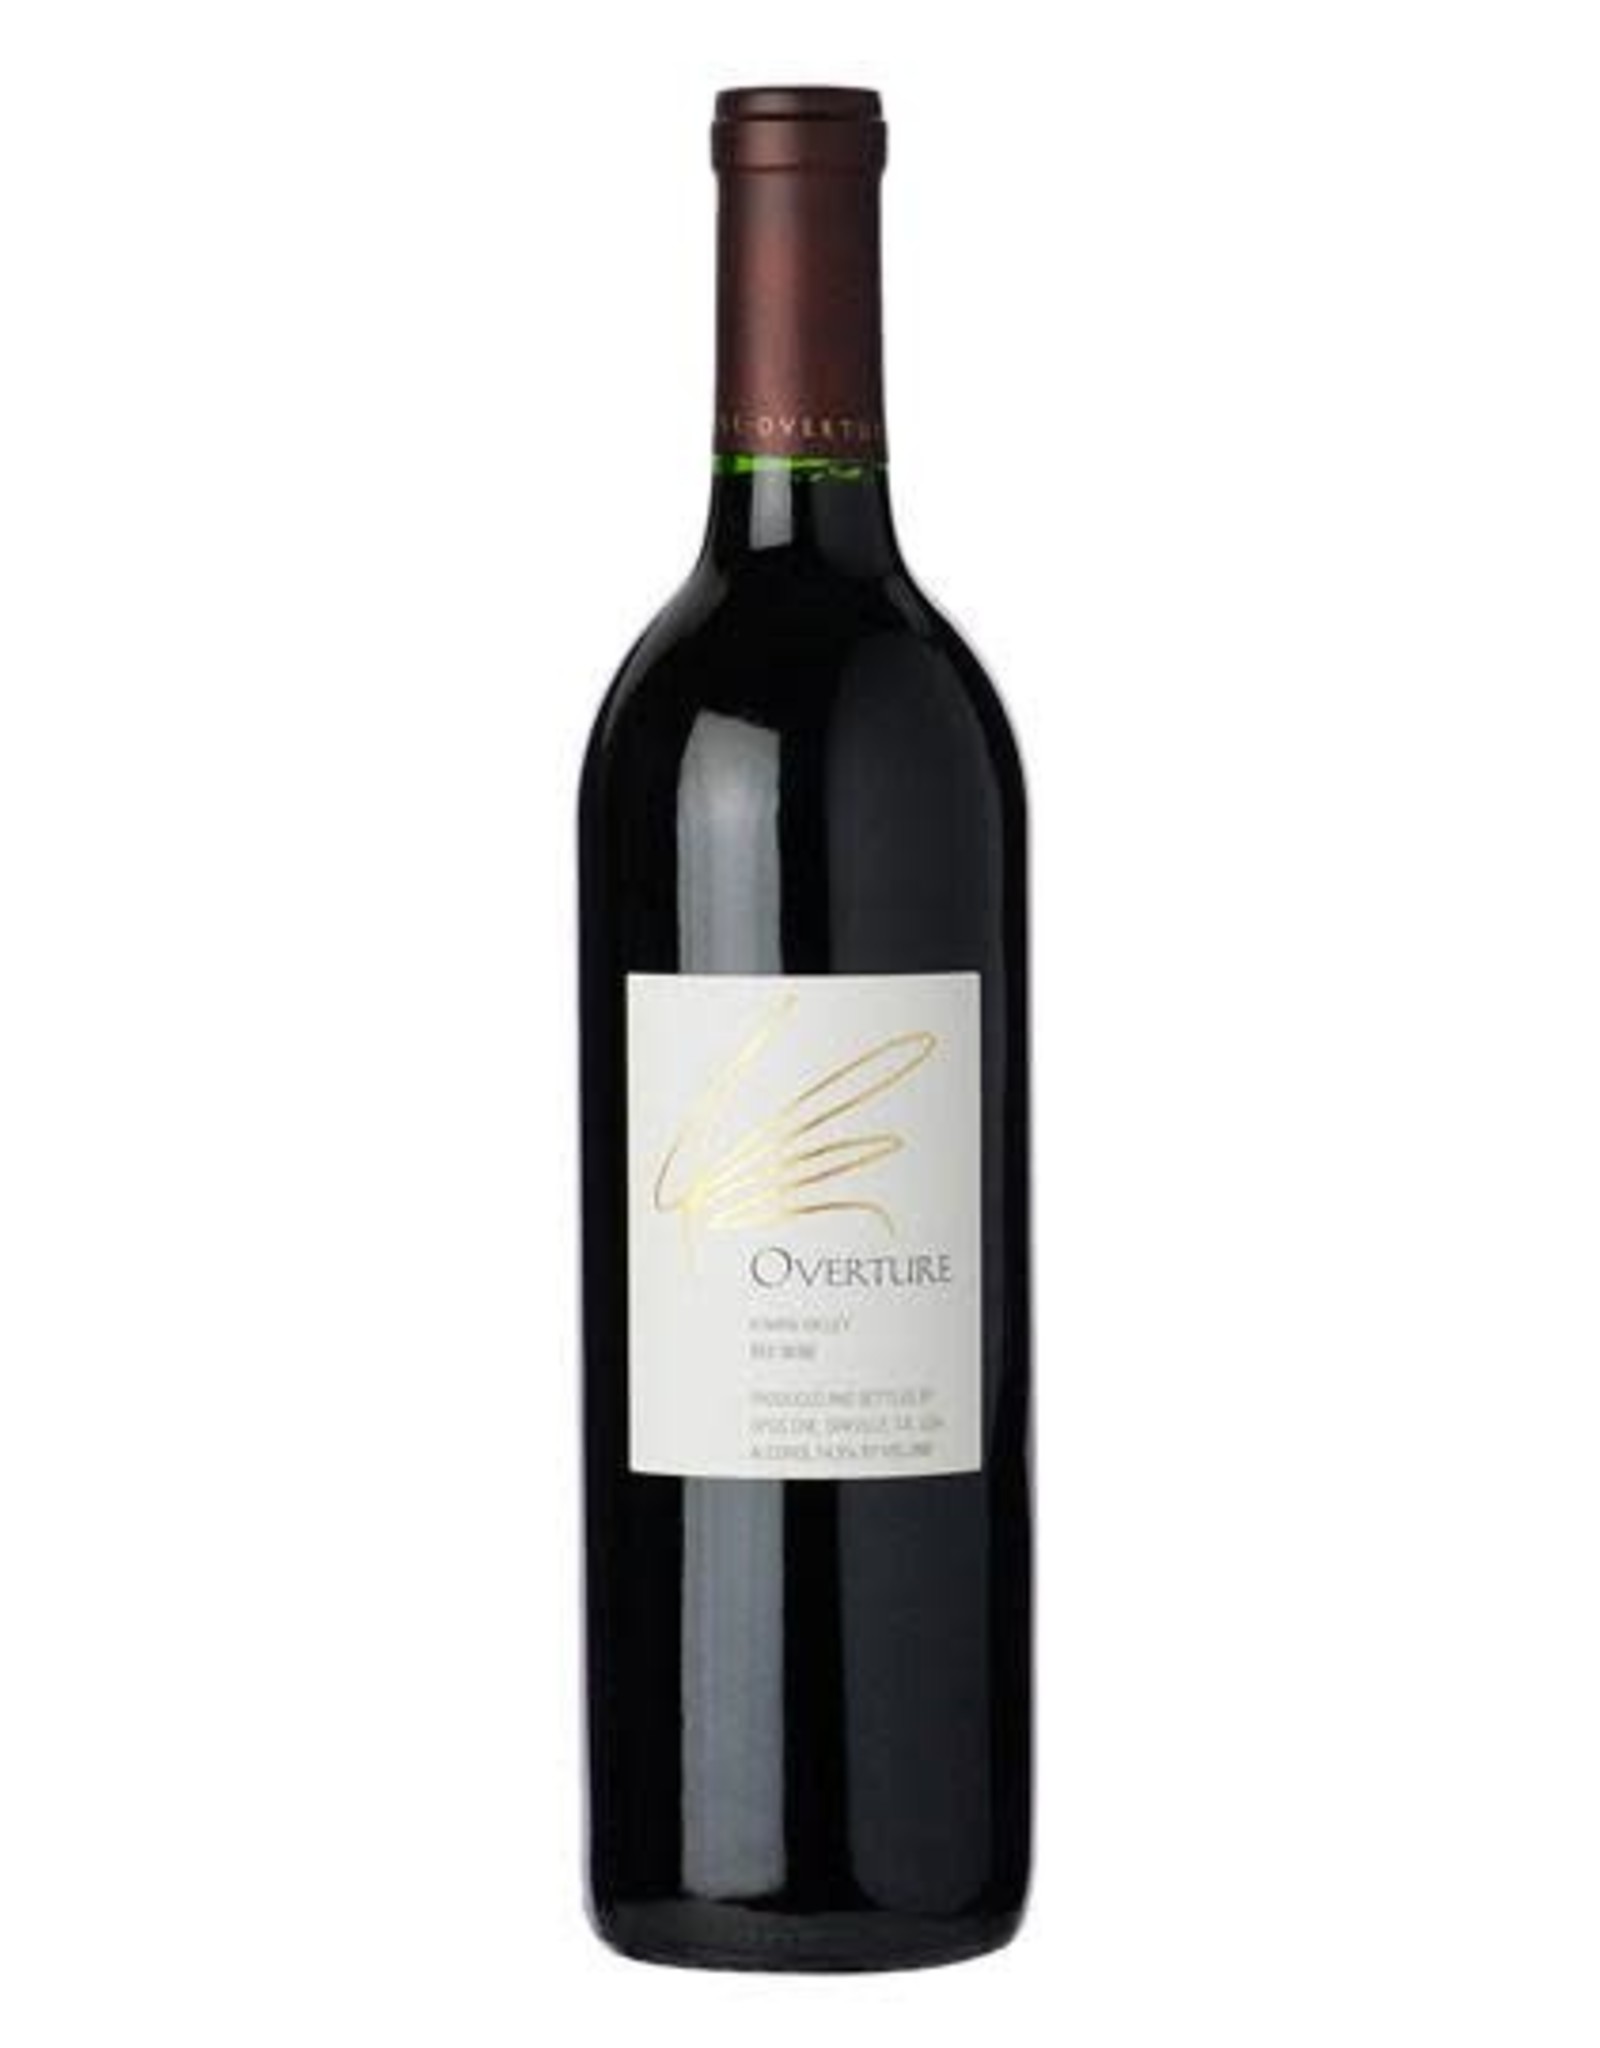 Opus One Overture nv